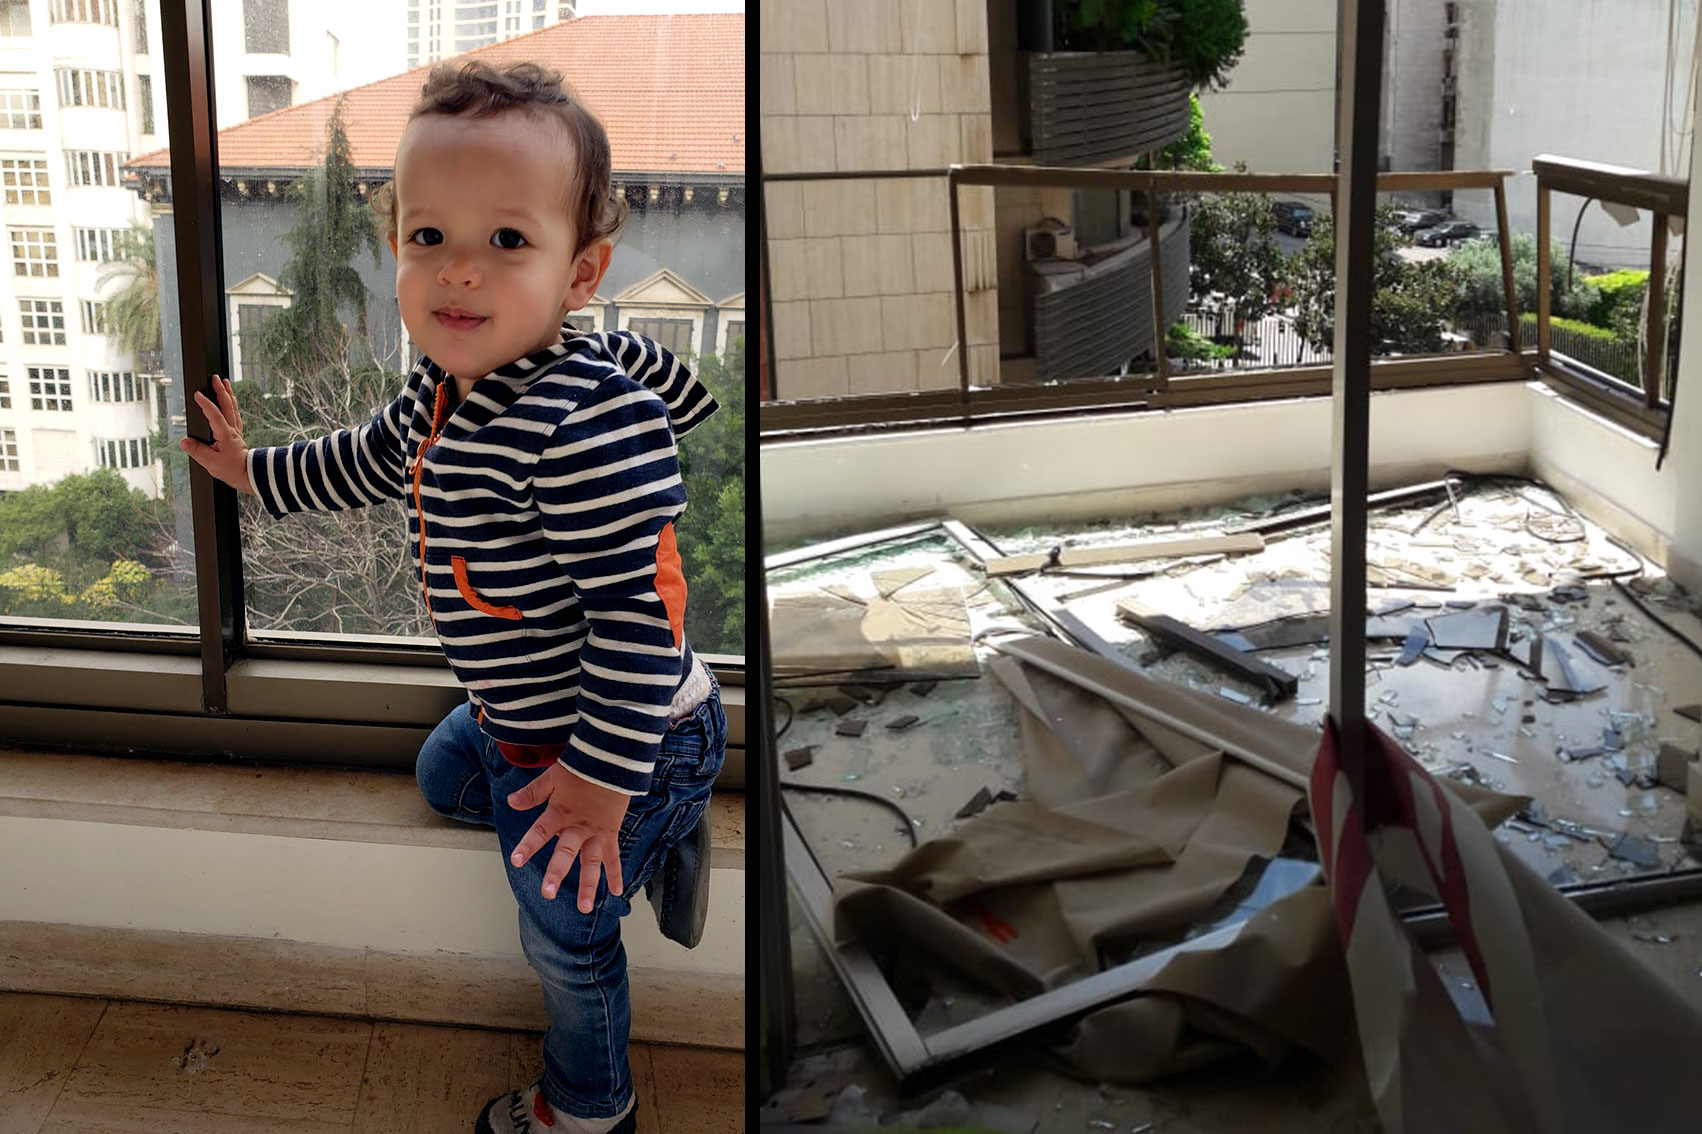 On the left is a photo of Issac playful and happy. On the right is of a child's high chair amidst shattered rubble, stained with blood.